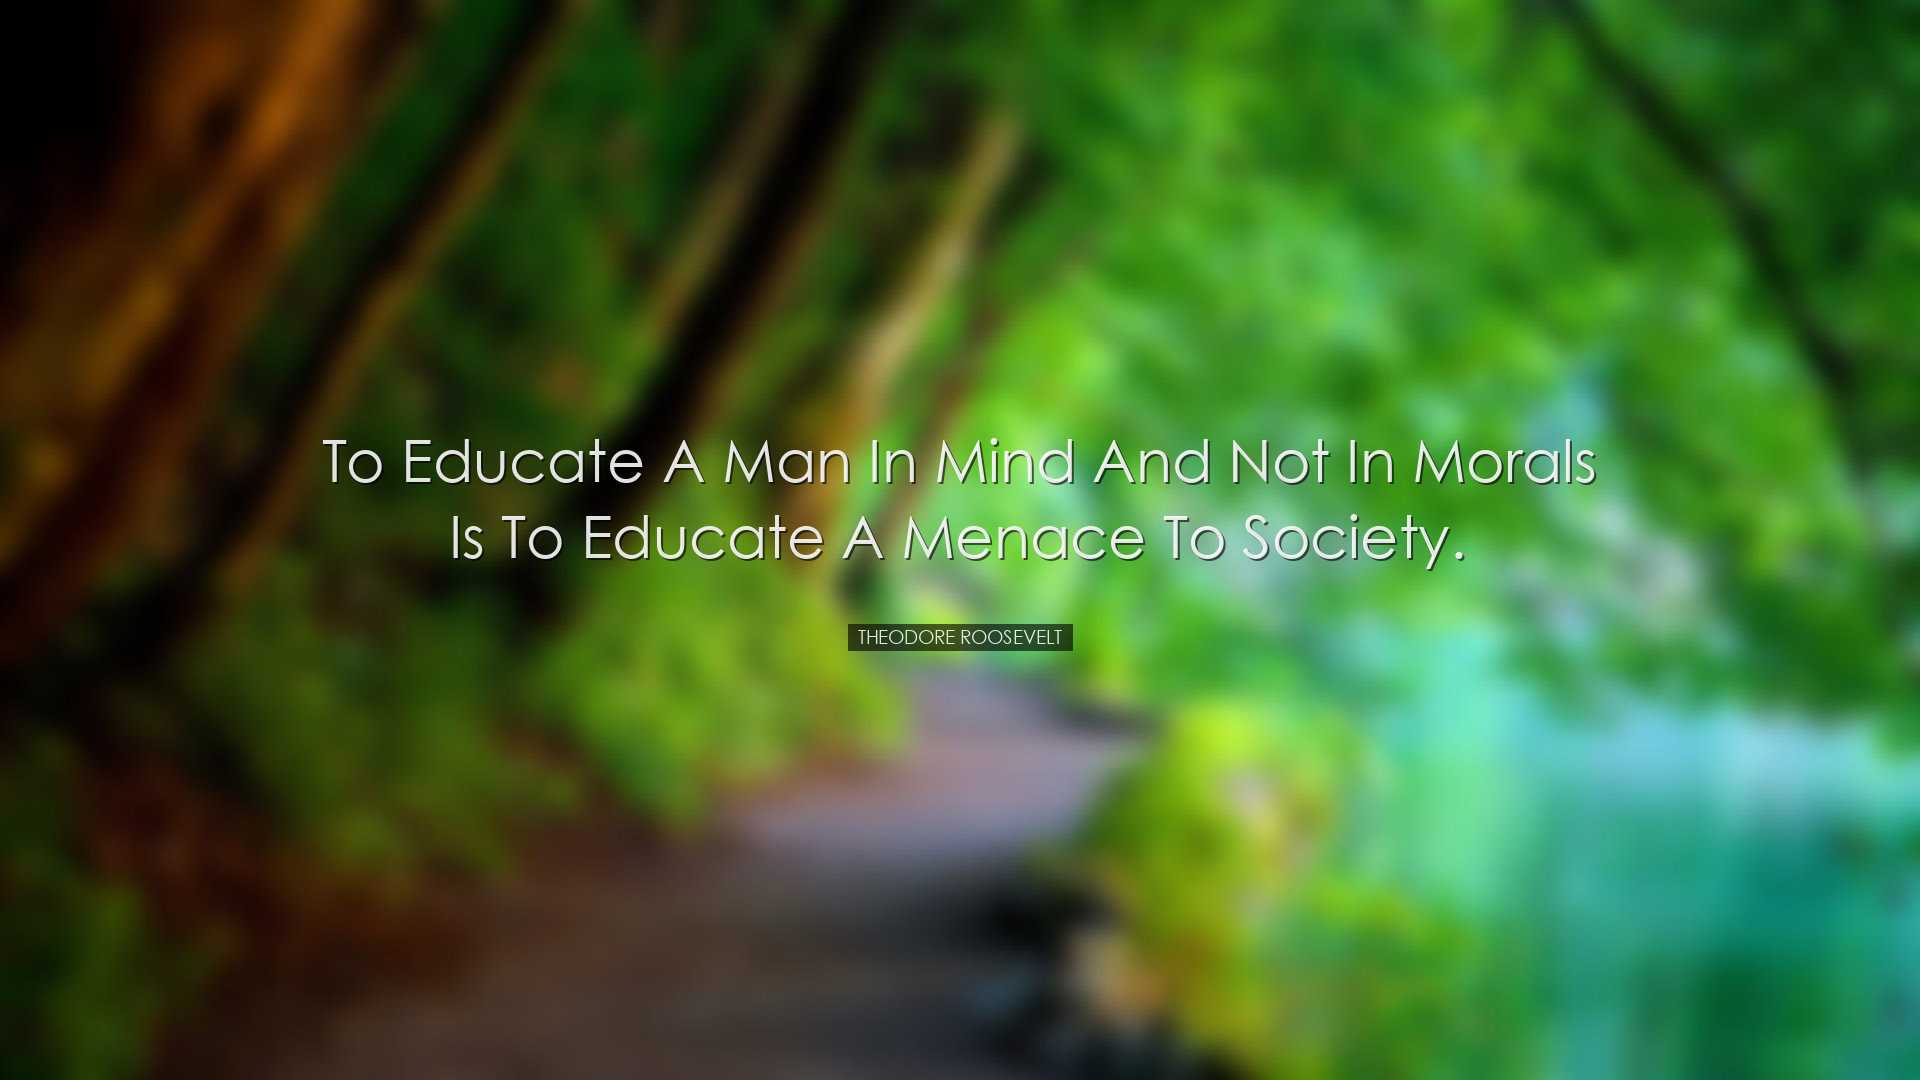 To educate a man in mind and not in morals is to educate a menace